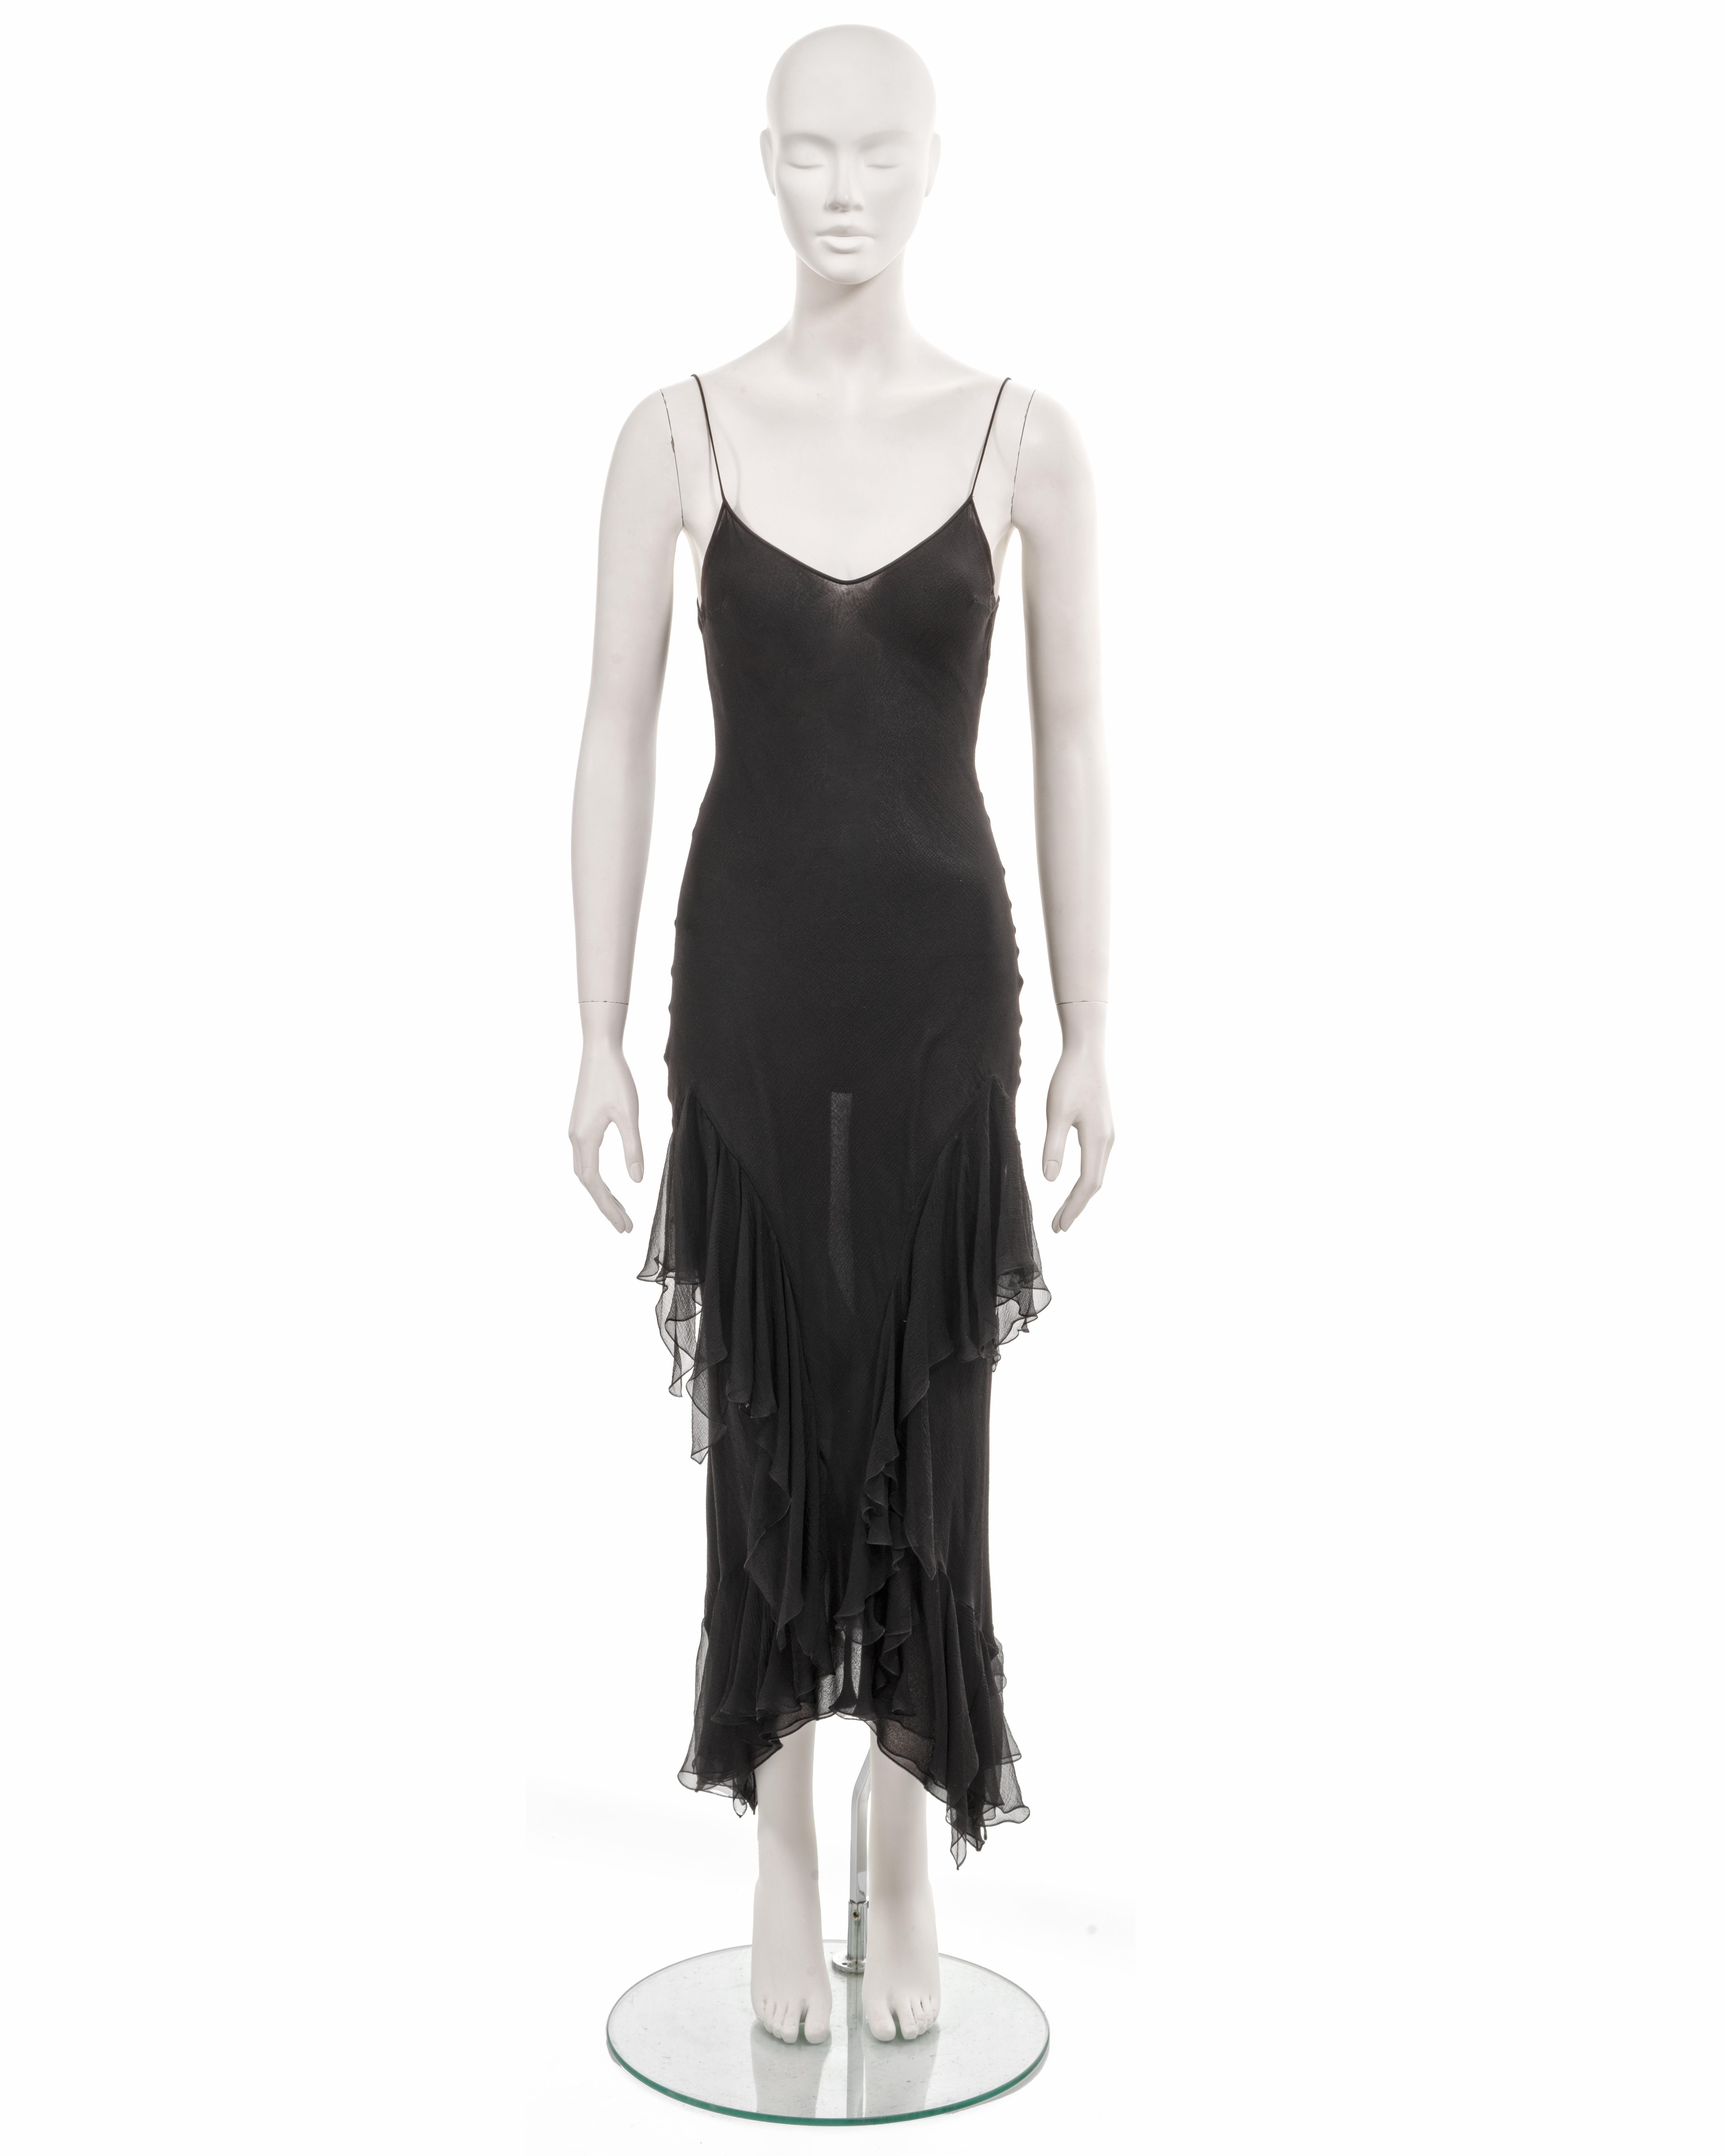 ▪ Archival John Galliano evening dress
▪ Sold by One of a Kind Archive
▪ Fall-Winter 1997
▪ Black bias-cut silk chiffon
▪ Double-layered 
▪ Spaghetti straps 
▪ Ankle length skirt with ruffled trims 
▪ FR40 - UK12 - US8
▪ Made in France  

All